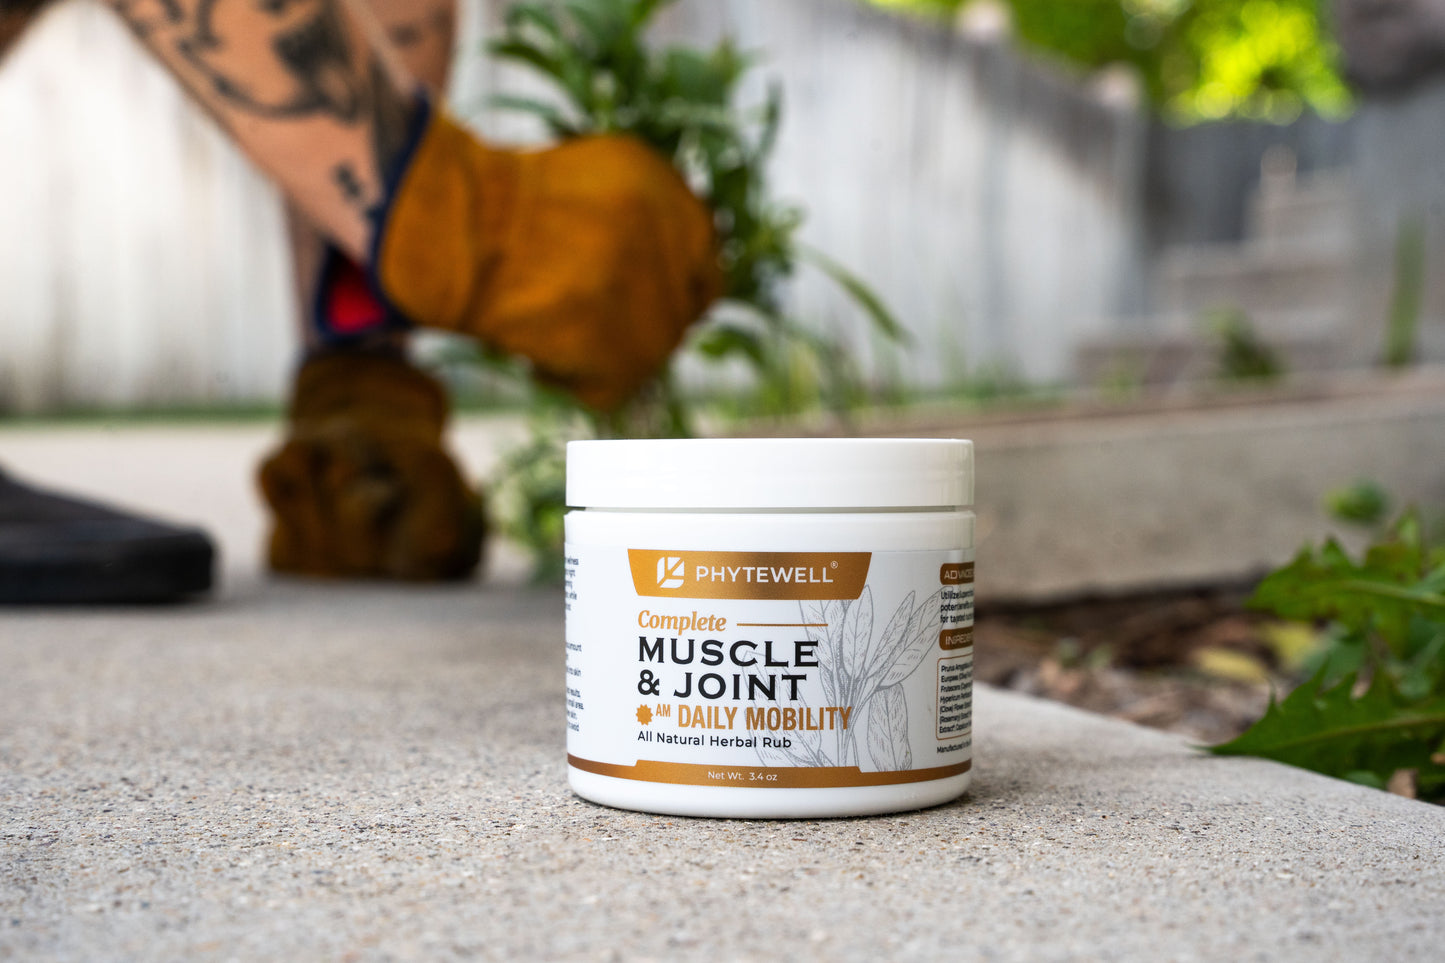 Muscle & Joint- AM Daily Mobility